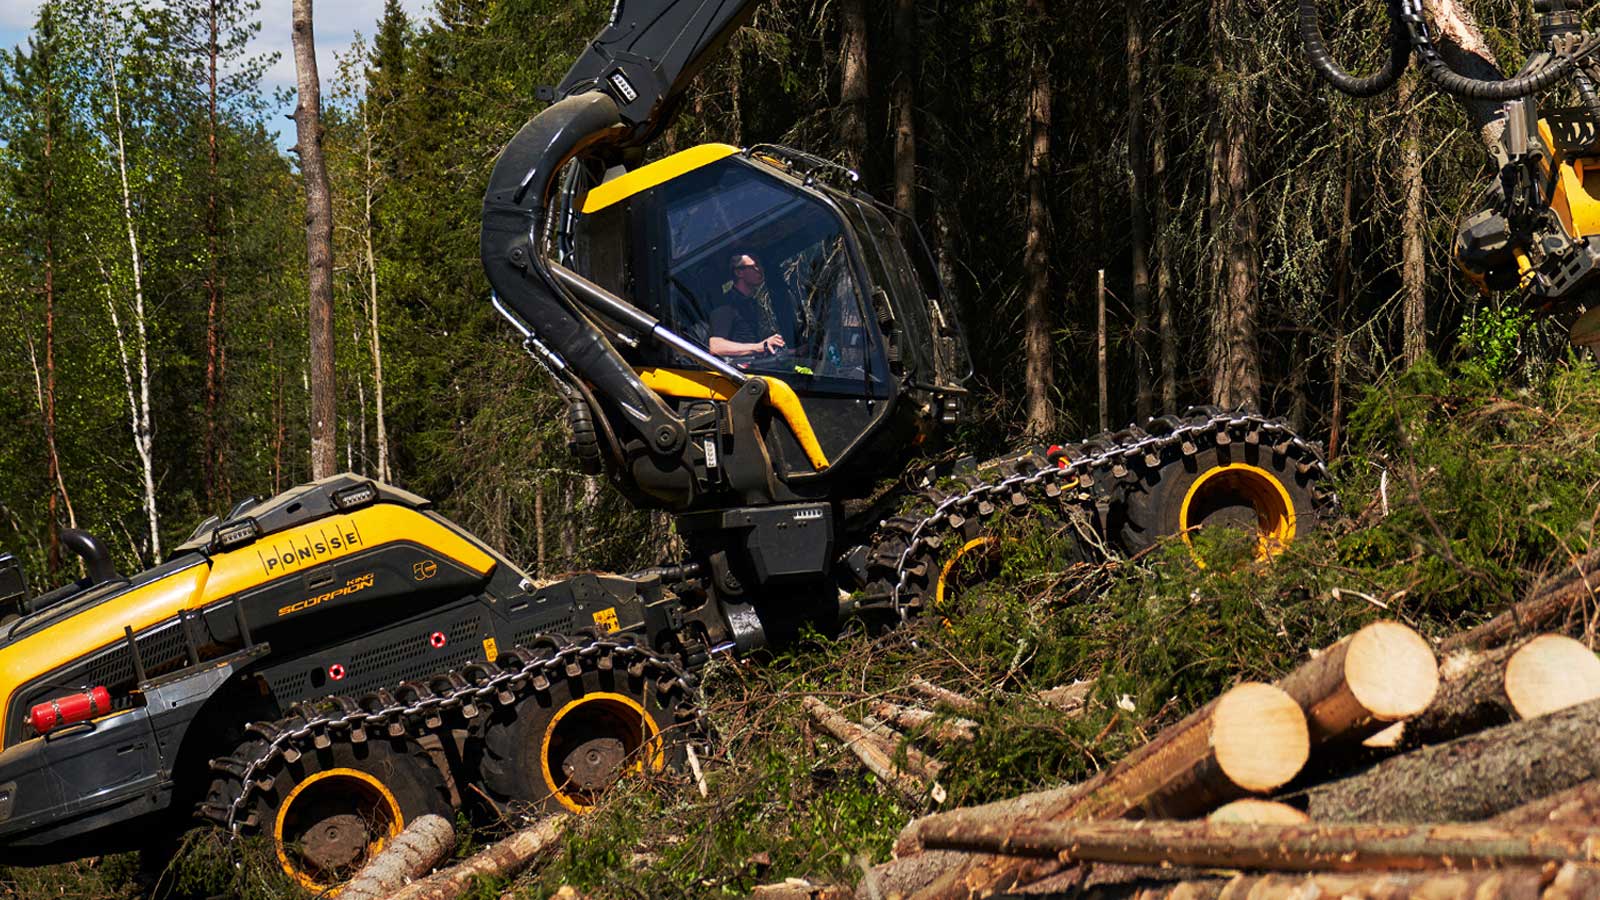 Case Solita and Ponsse: Premium forest machinery quality and production efficiency through a modern MES